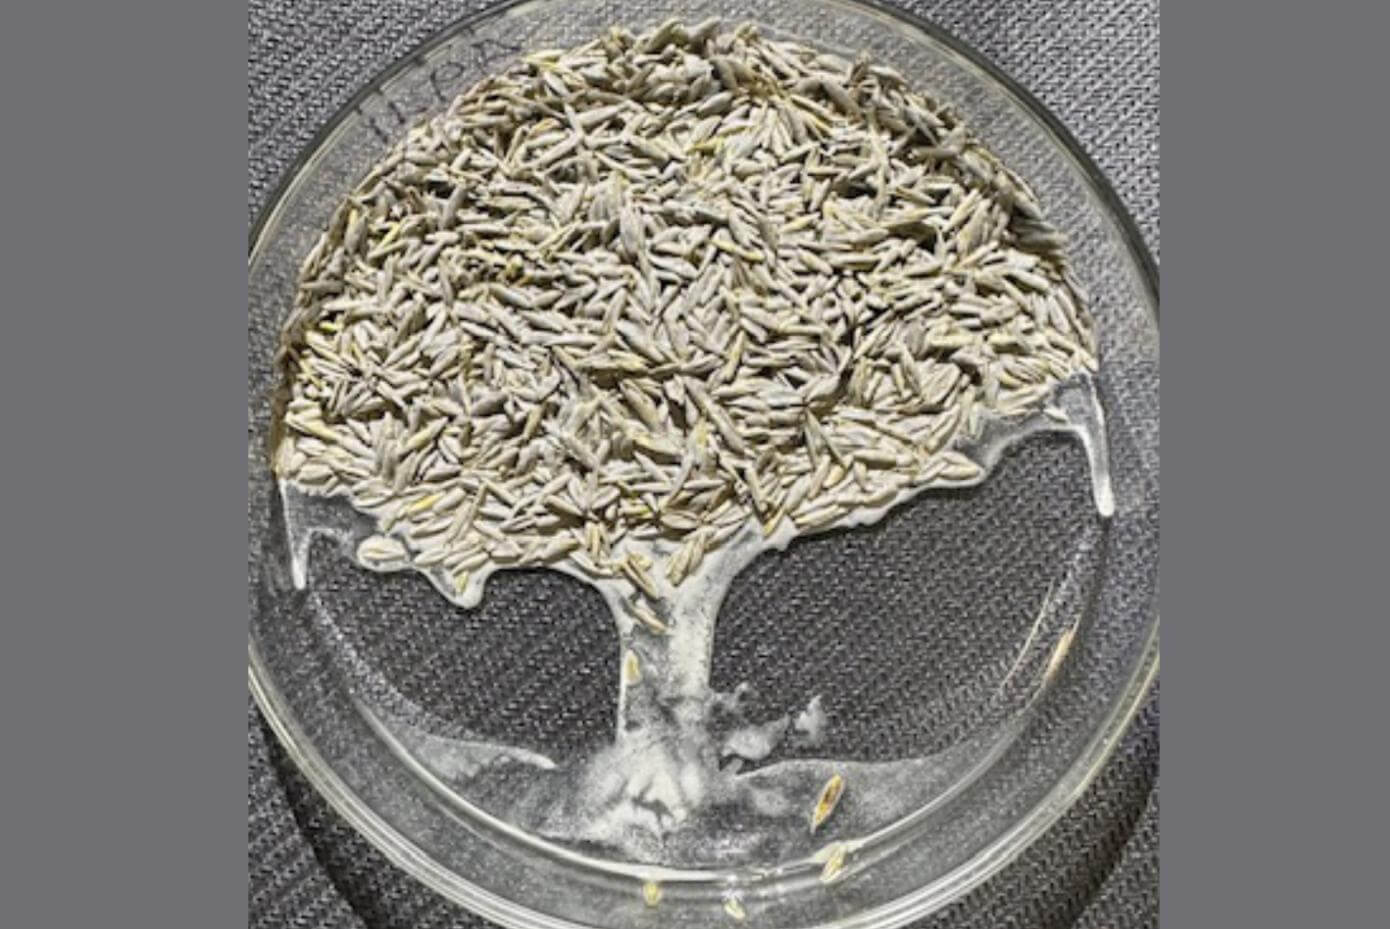 Coated seed in petri dish showing water flowing from the seeds. These seeds are coated only with lime.